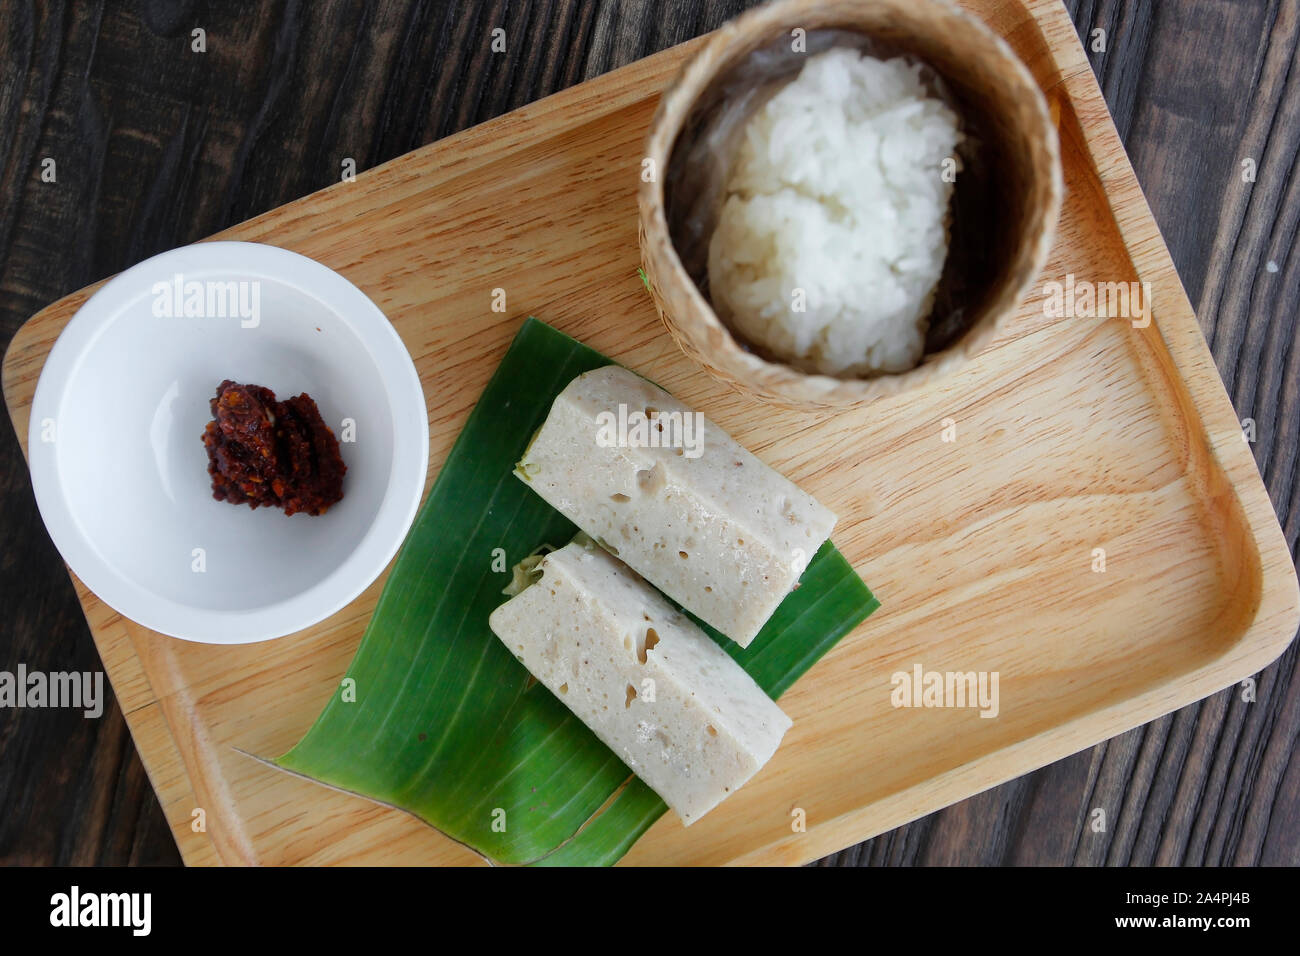 Thai food, Vietnamese pork sausage with red hot chili dip and sticky rice Stock Photo